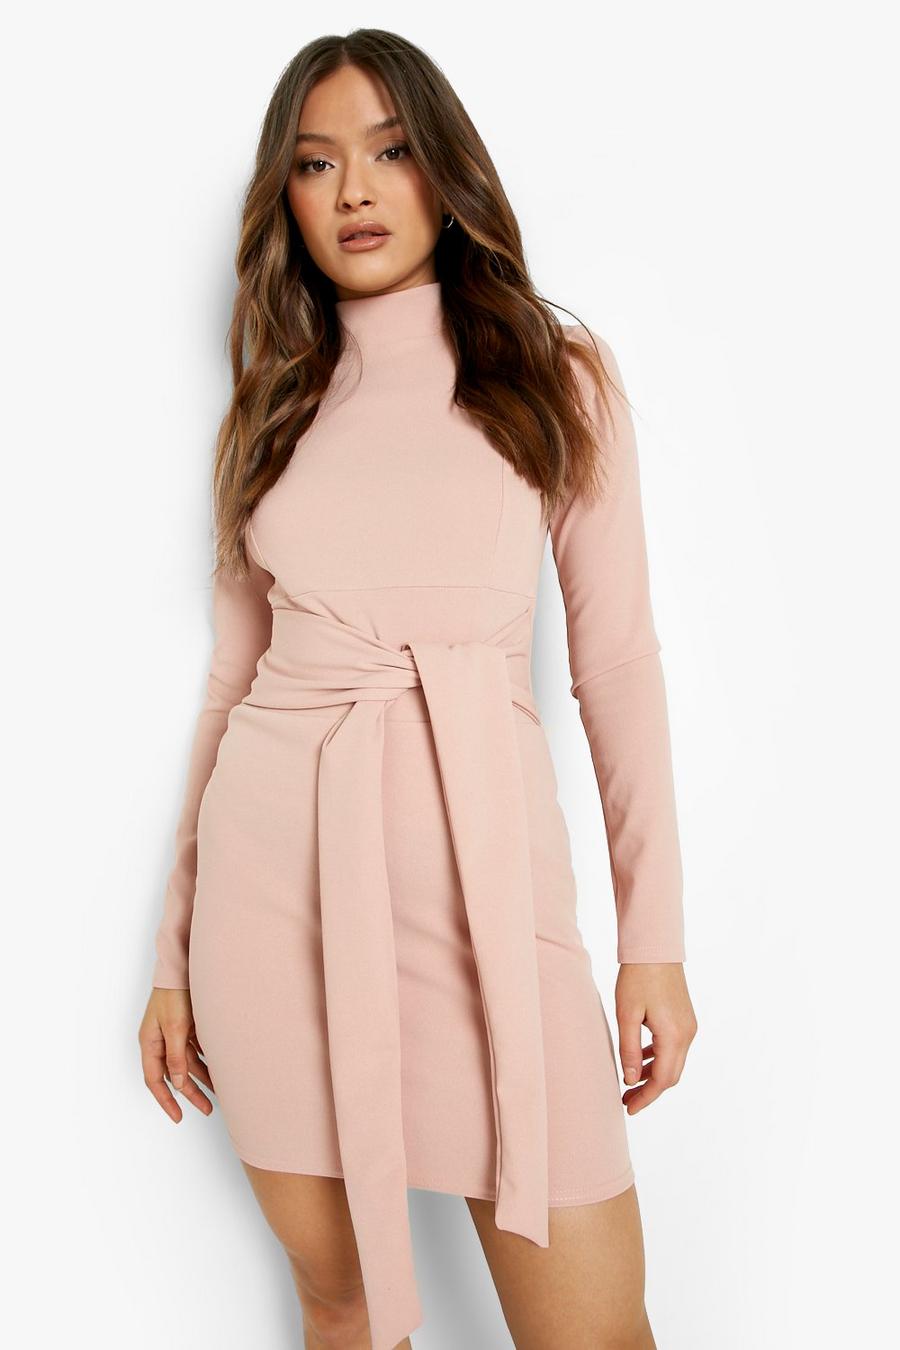 Dusty rose pink High Neck Tie Waist Fitted Mini Dress